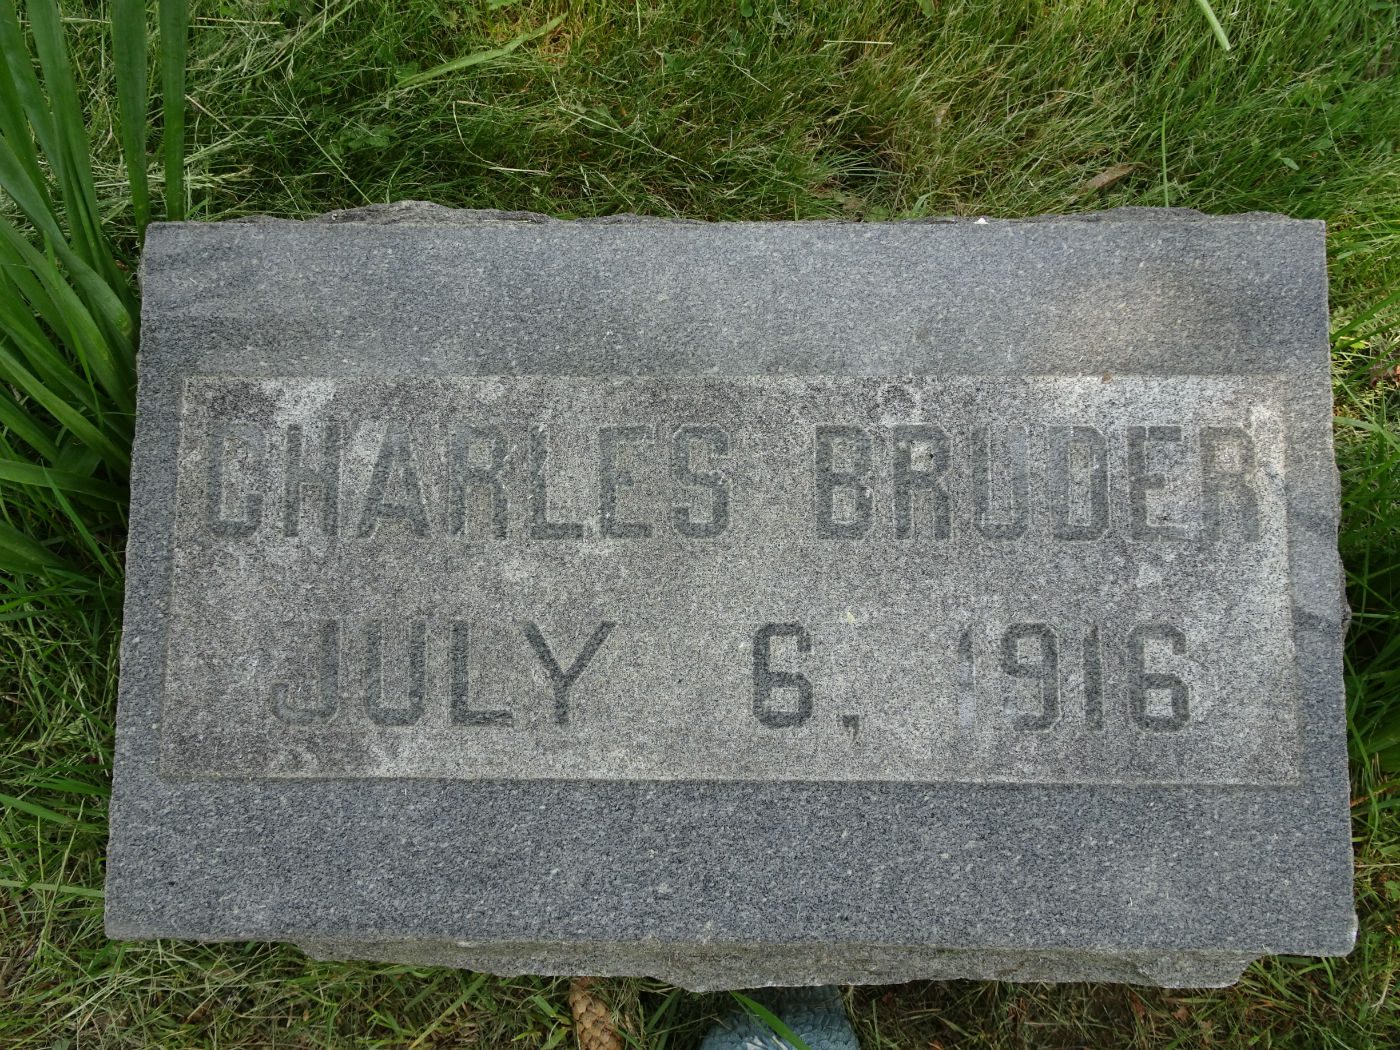 close up of a headstone